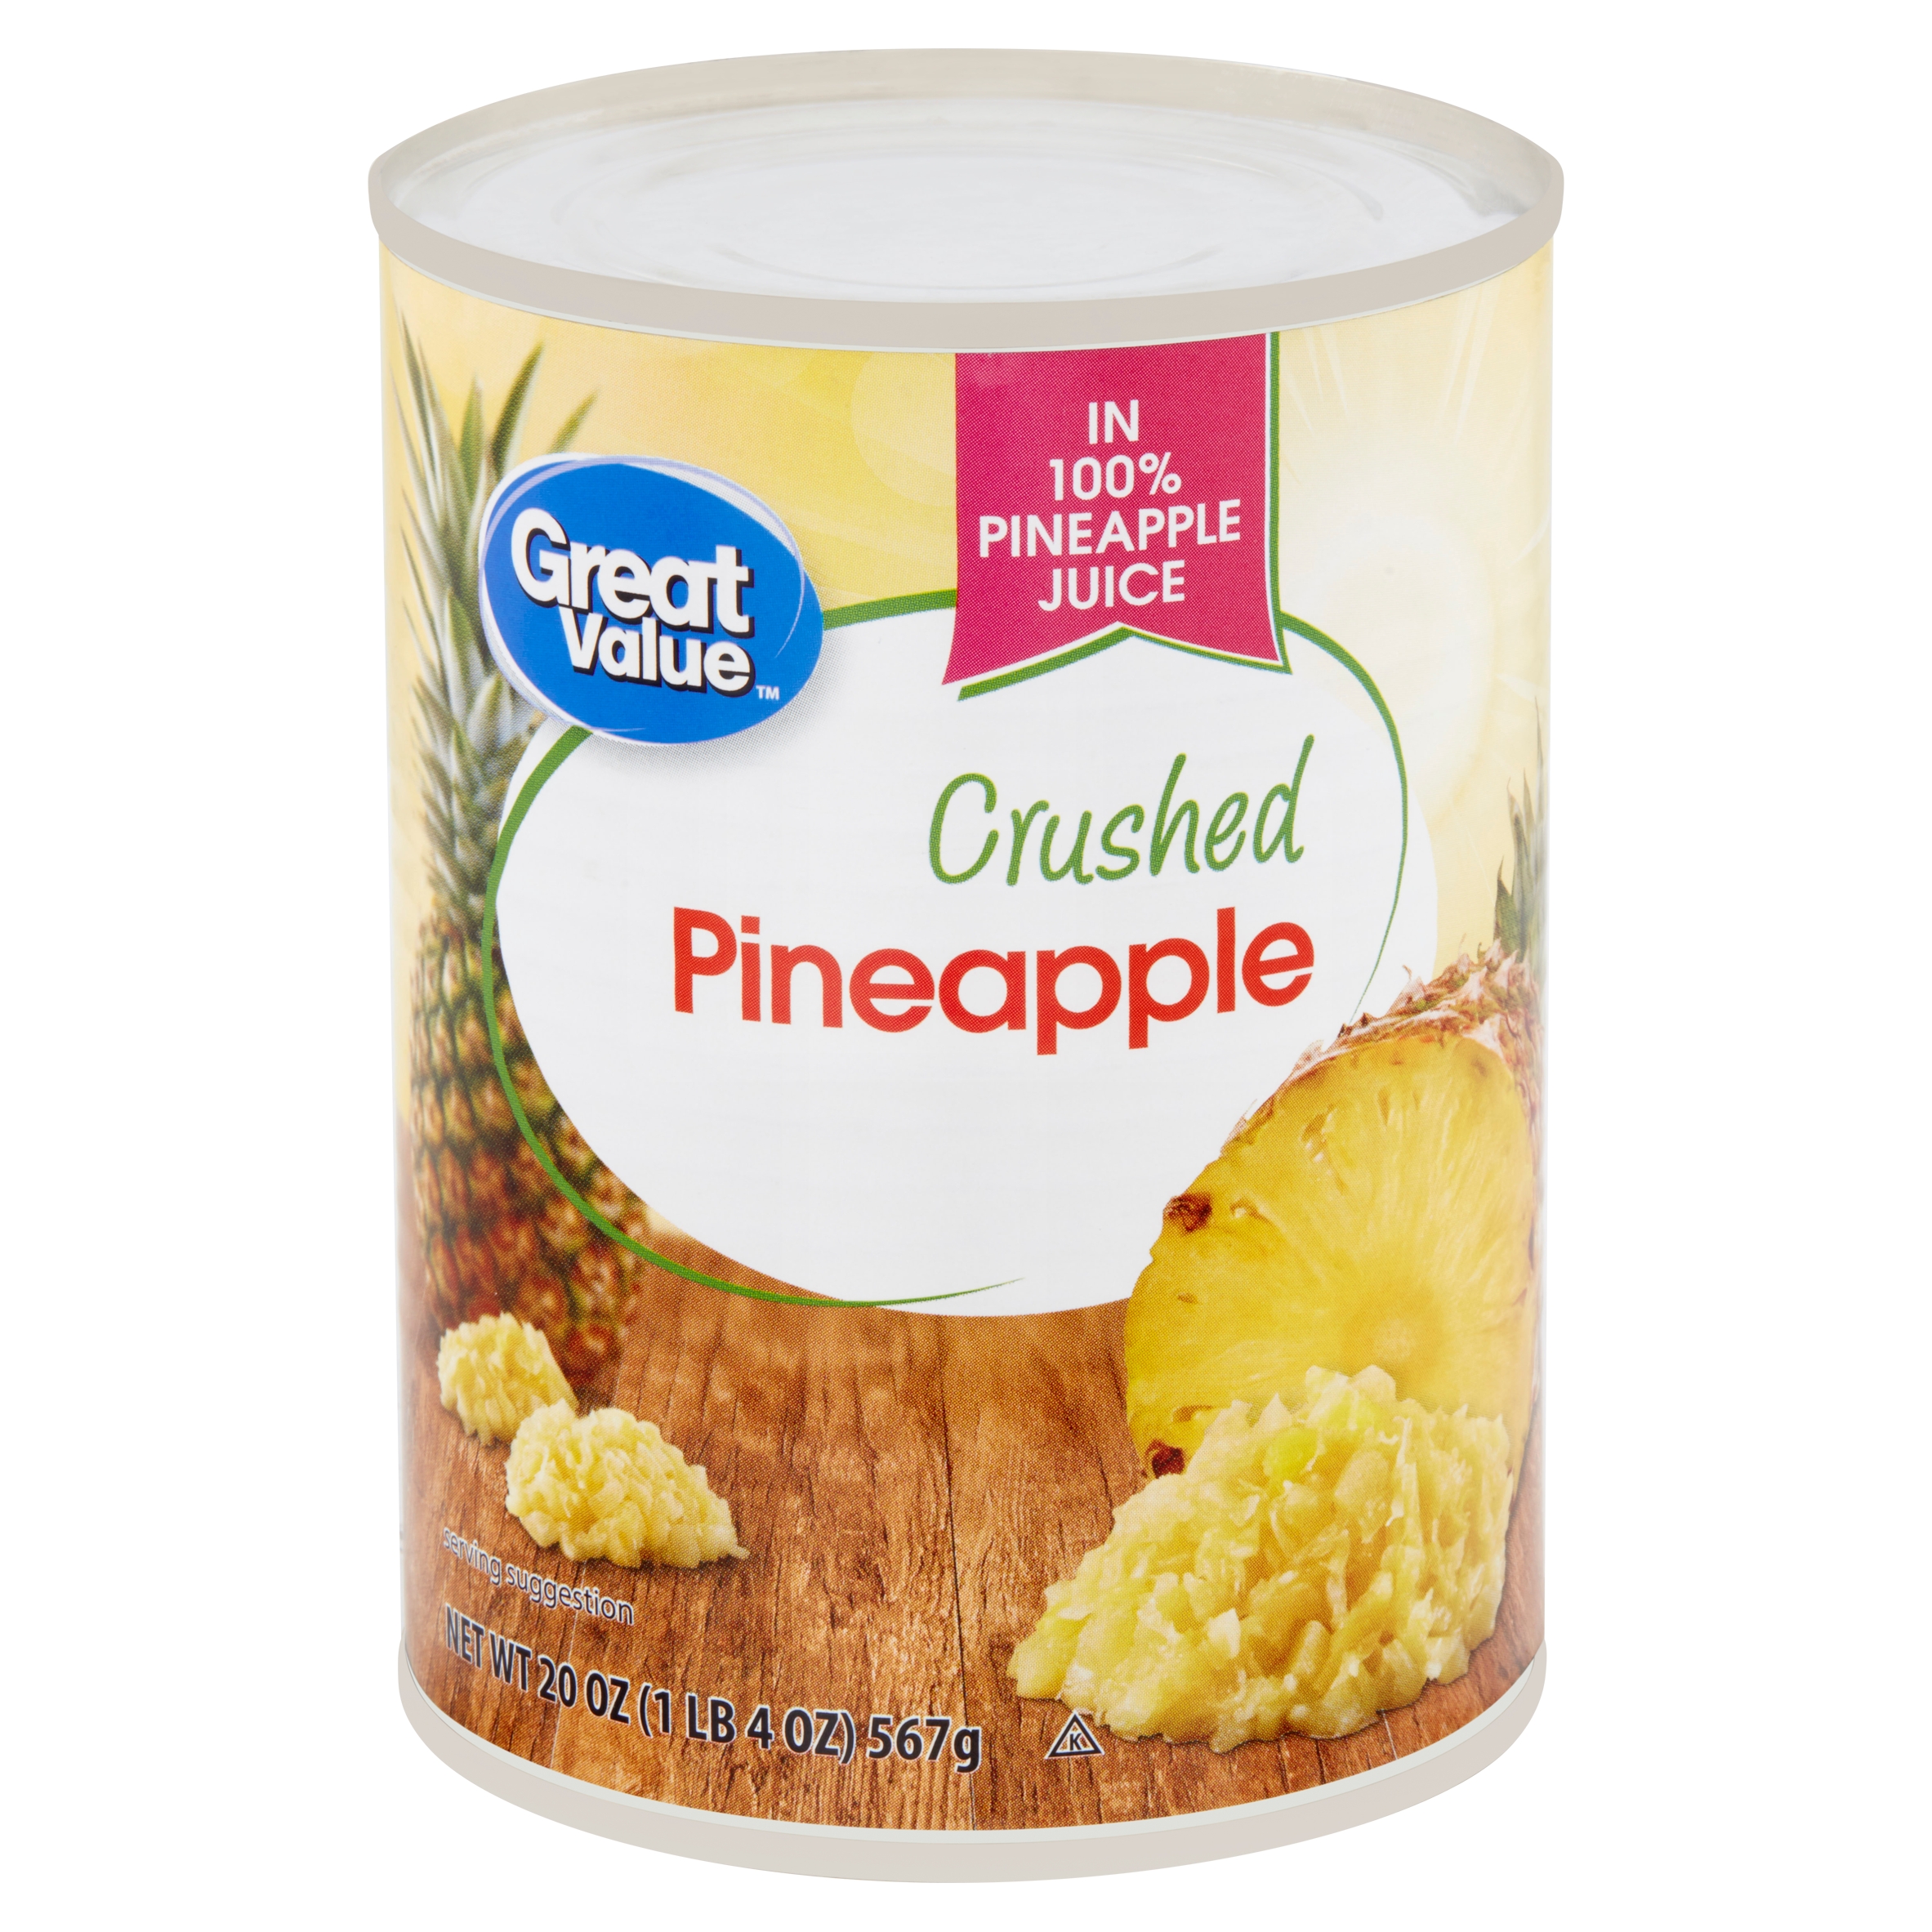 Great Value Canned Crushed Pineapple, 20 Oz Image